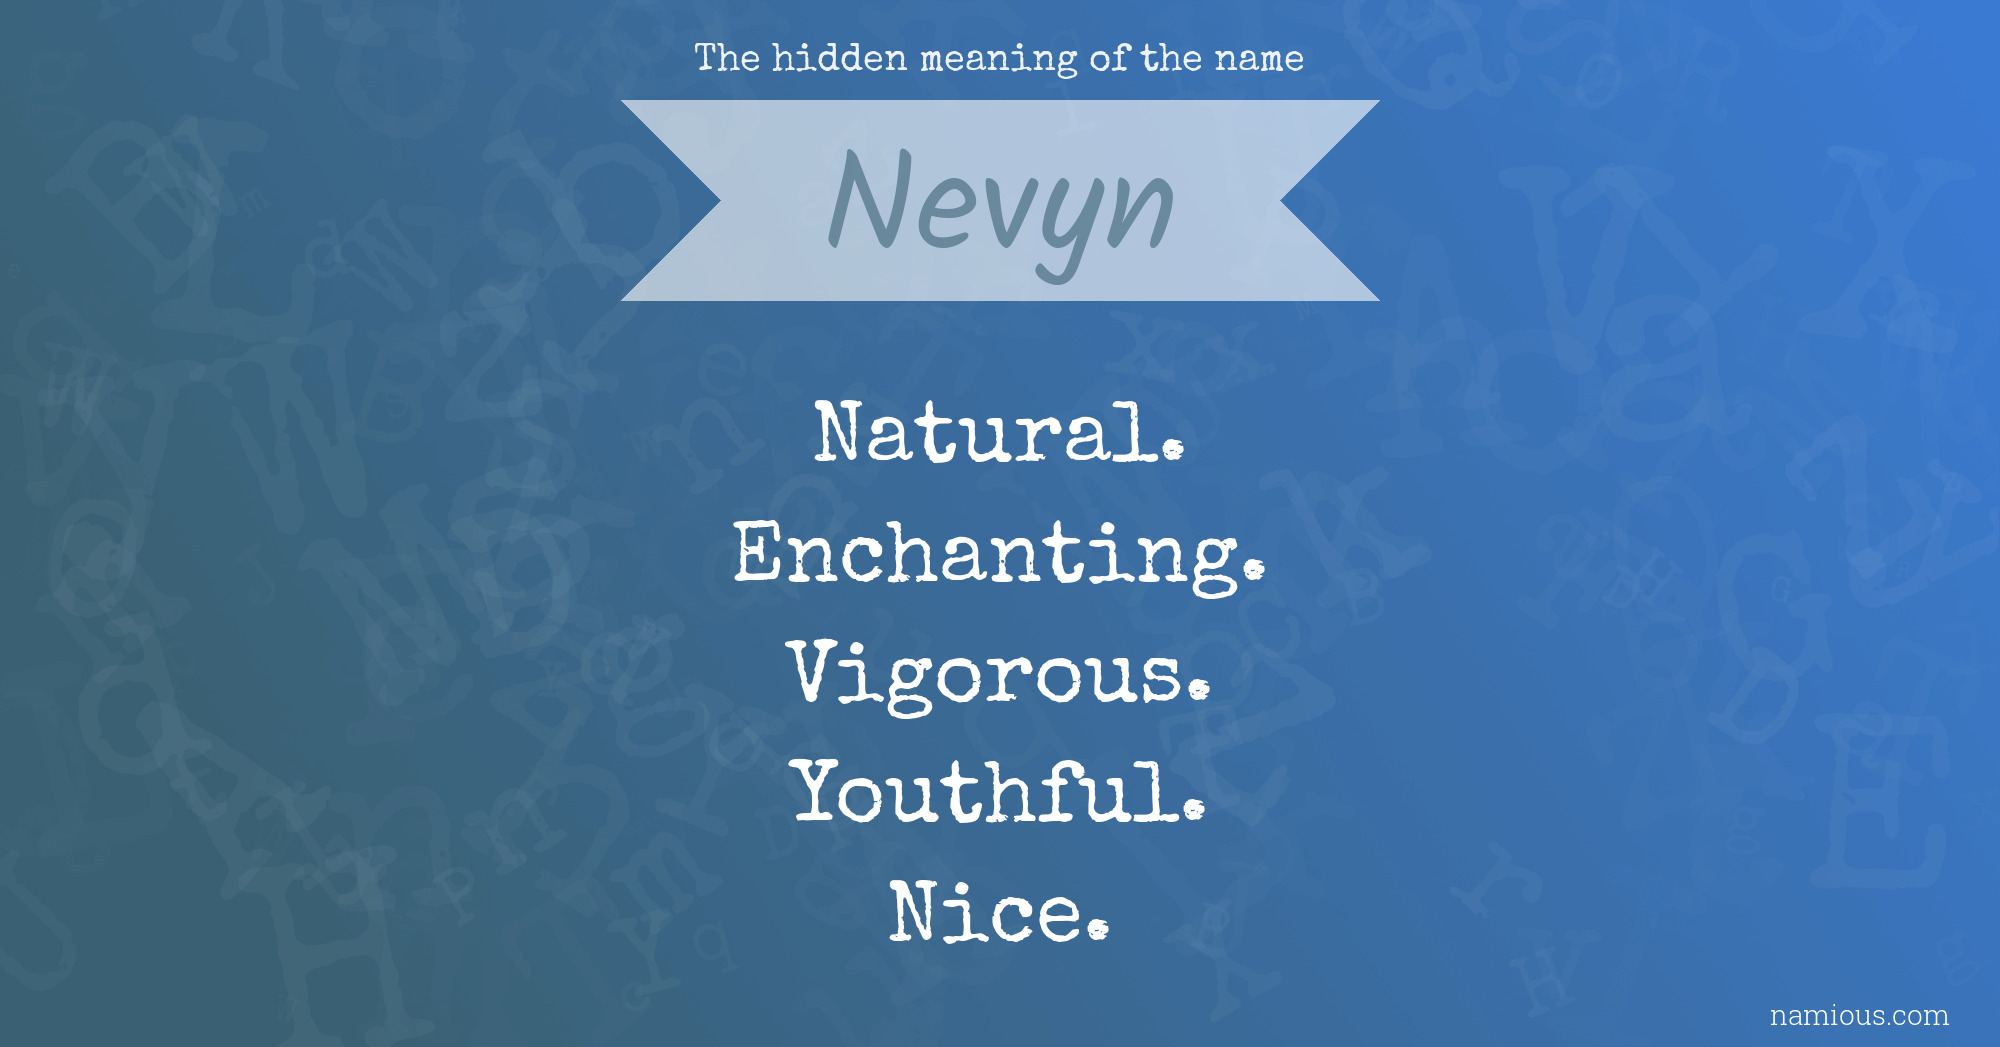 The hidden meaning of the name Nevyn